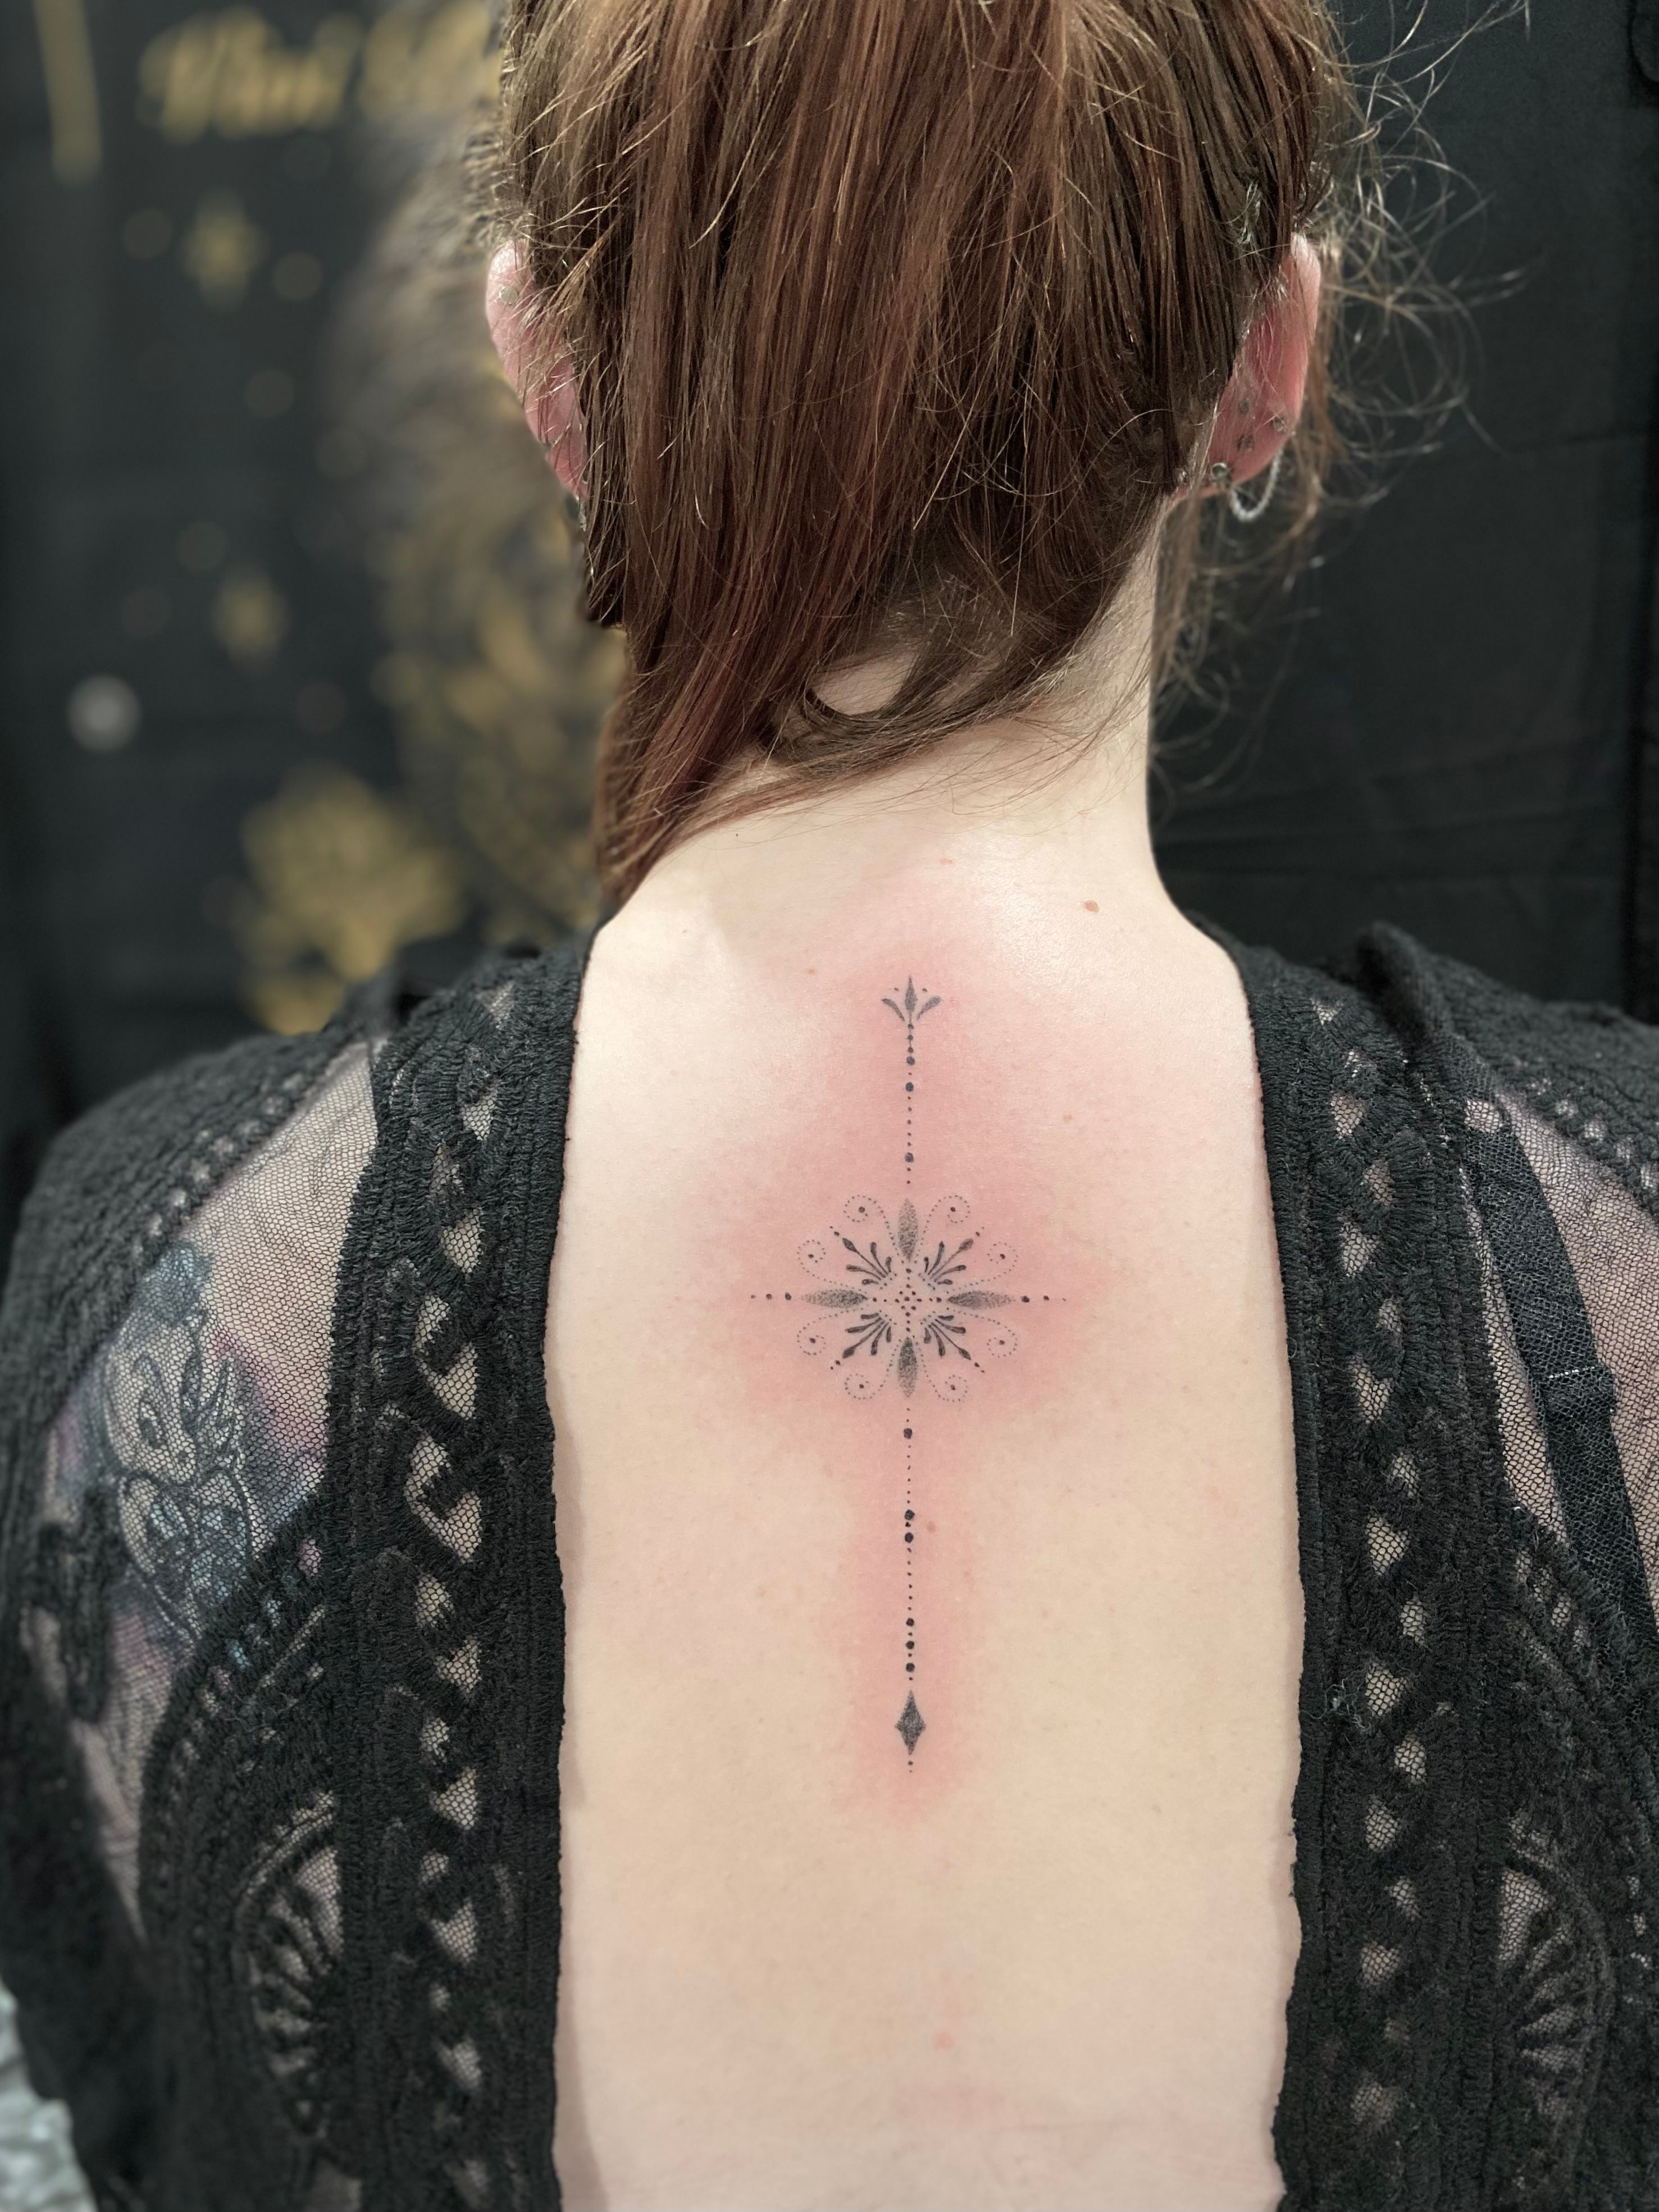 21 Small Meaningful Tattoos For 2021 - tattooglee | Simple tattoos for  women, Small meaningful tattoos, Tiny tattoos for girls